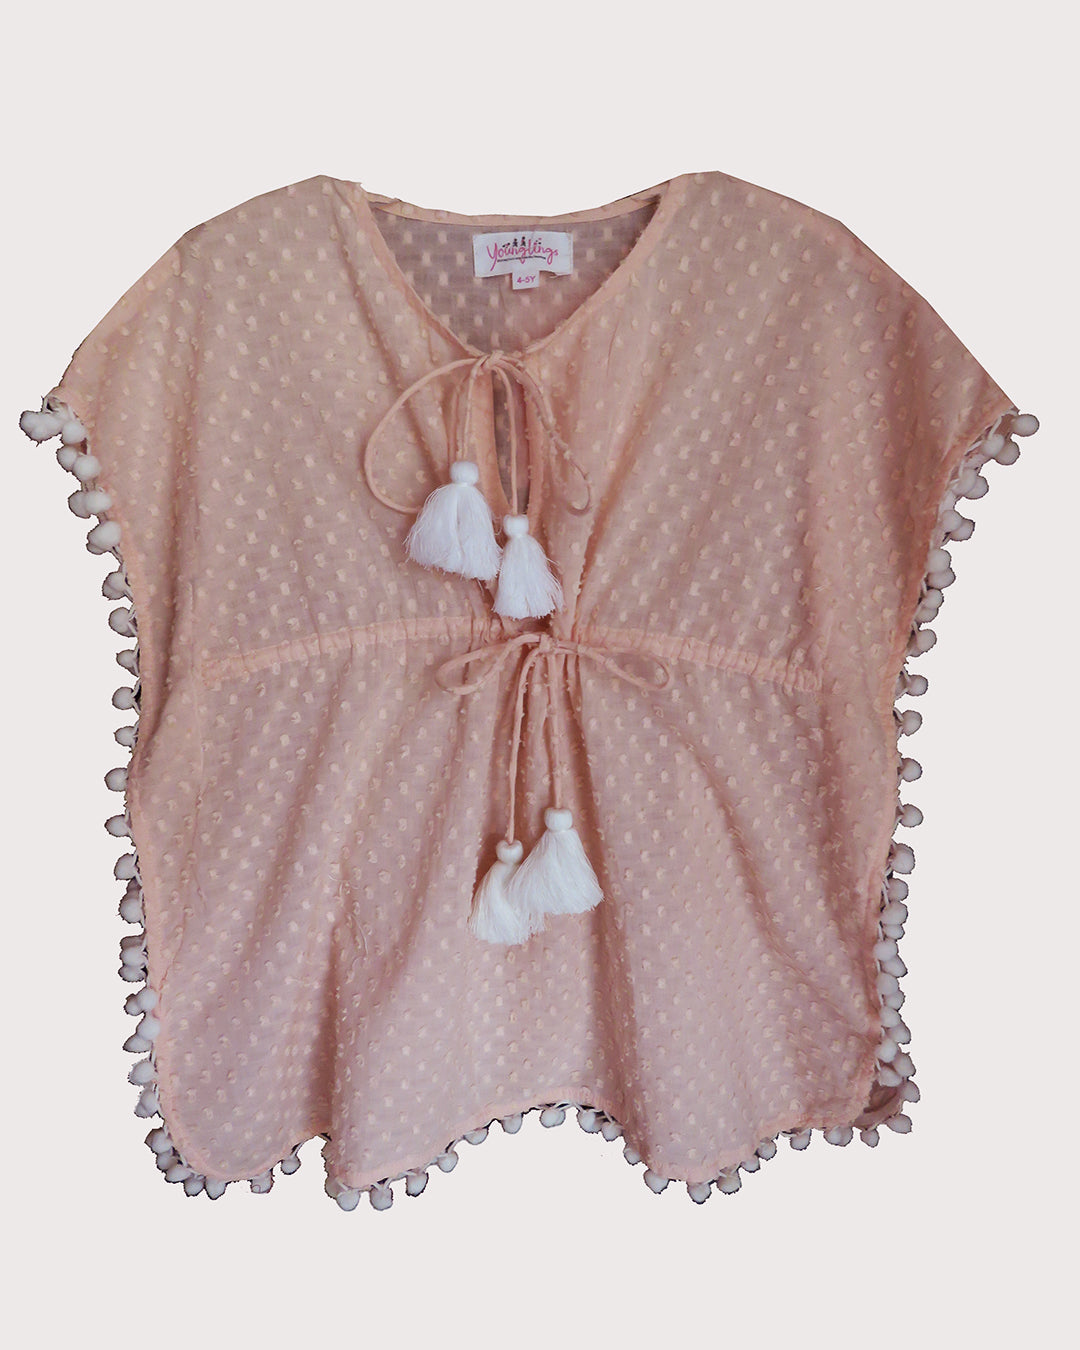 PINK DOBBY KAFTAN,WITH POM POM DETAILING,HAS A V NECK,GATHERED AND TIE-UP DETAIL ON THE FRONT